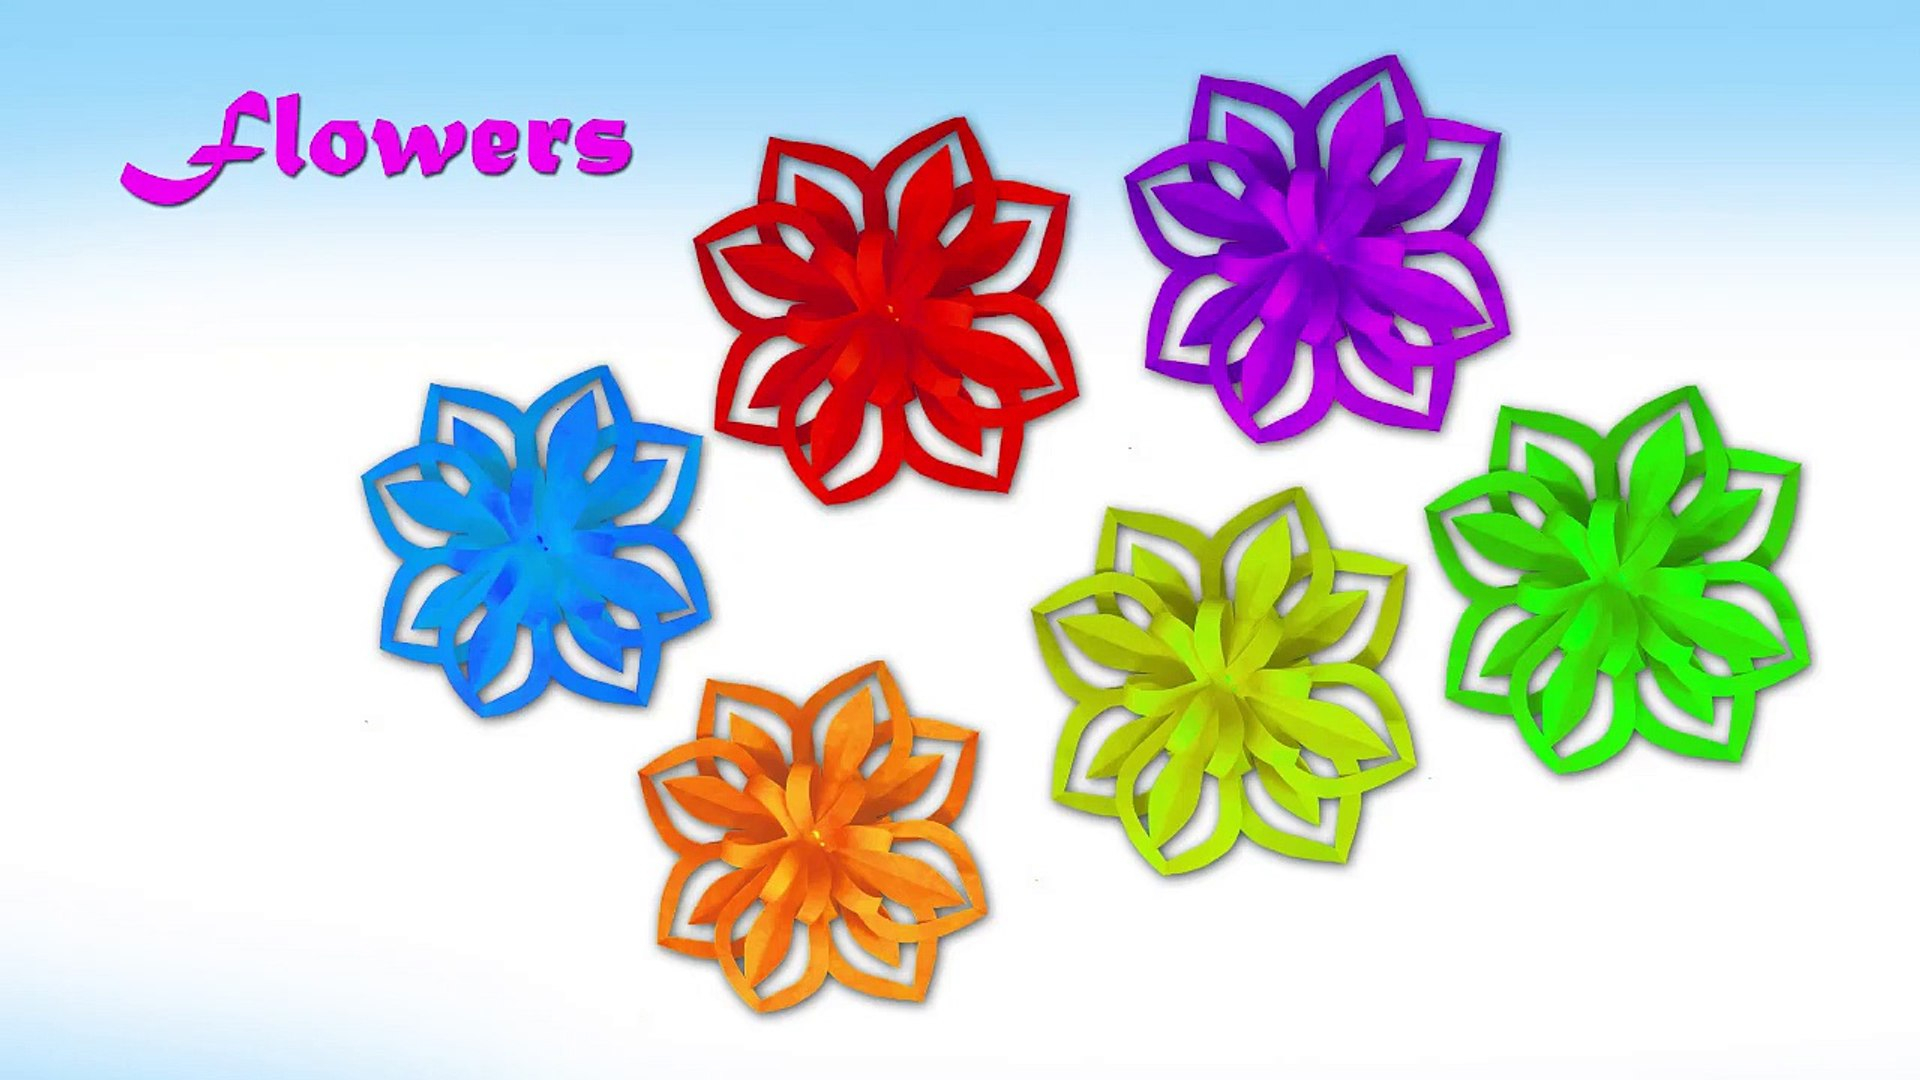 Easy Origami Flower Origami Flowers How To Make Origami Flowers Very Easy Origami For All 9sarr7